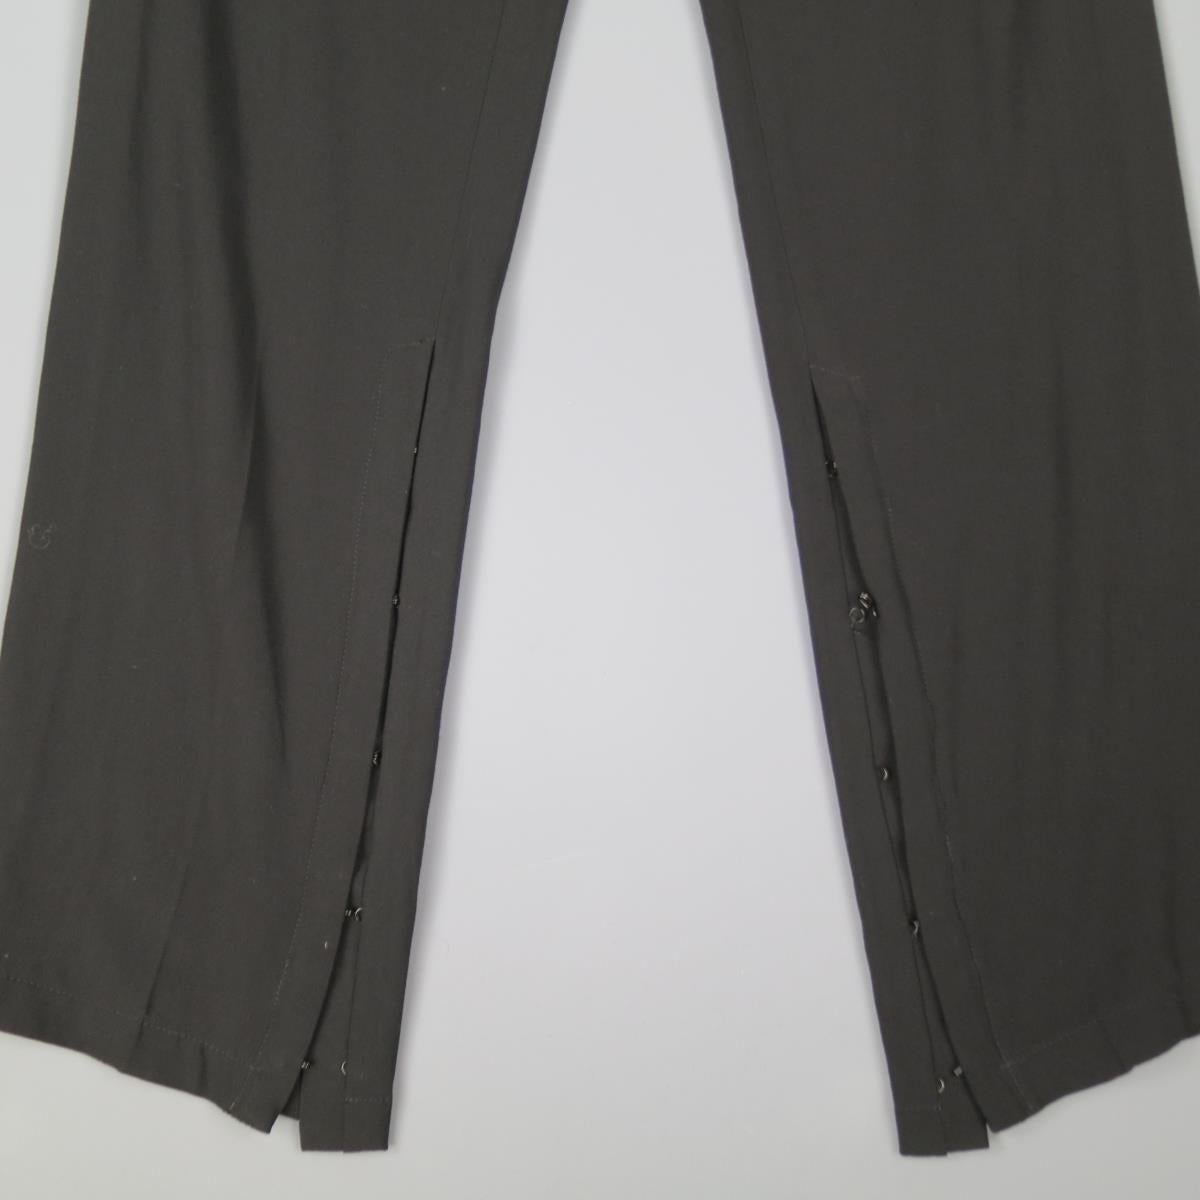 ANN DEMEULEMEESTER dress pants come in a wool viscose blend twill and feature a streamline, minimalist construction, slouchy, relaxed fit, and extended slit leg openings with hook eye closures. Made in Belgium.

Good Pre-Owned Condition.
Marked: